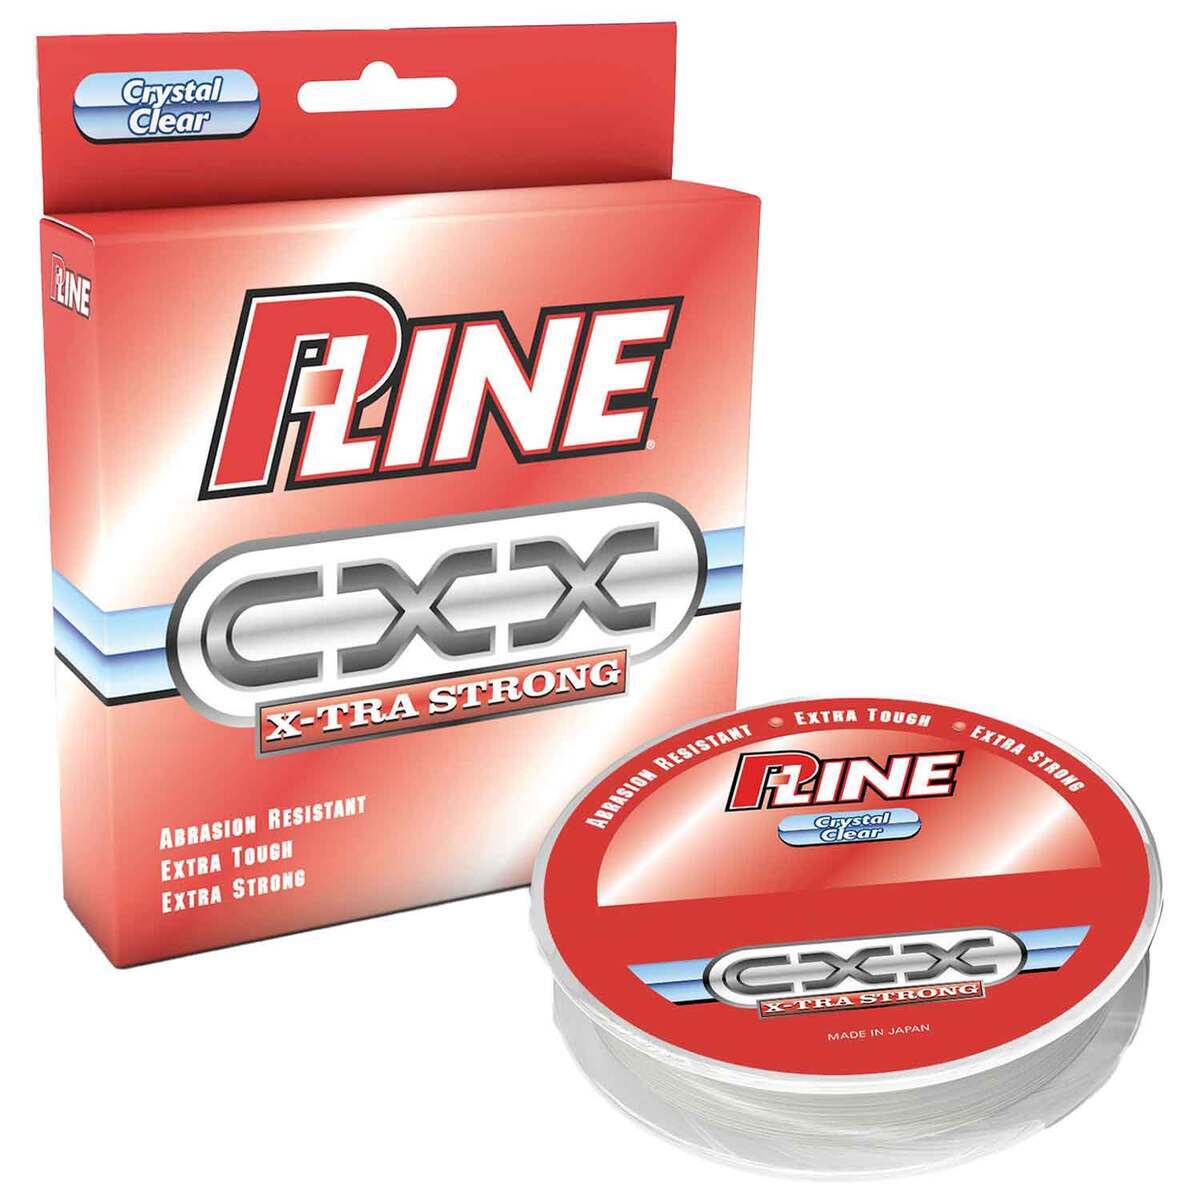 P-Line CXX X-tra Strong Copolymer Fishing Line - 4lb, Clear, 300yds